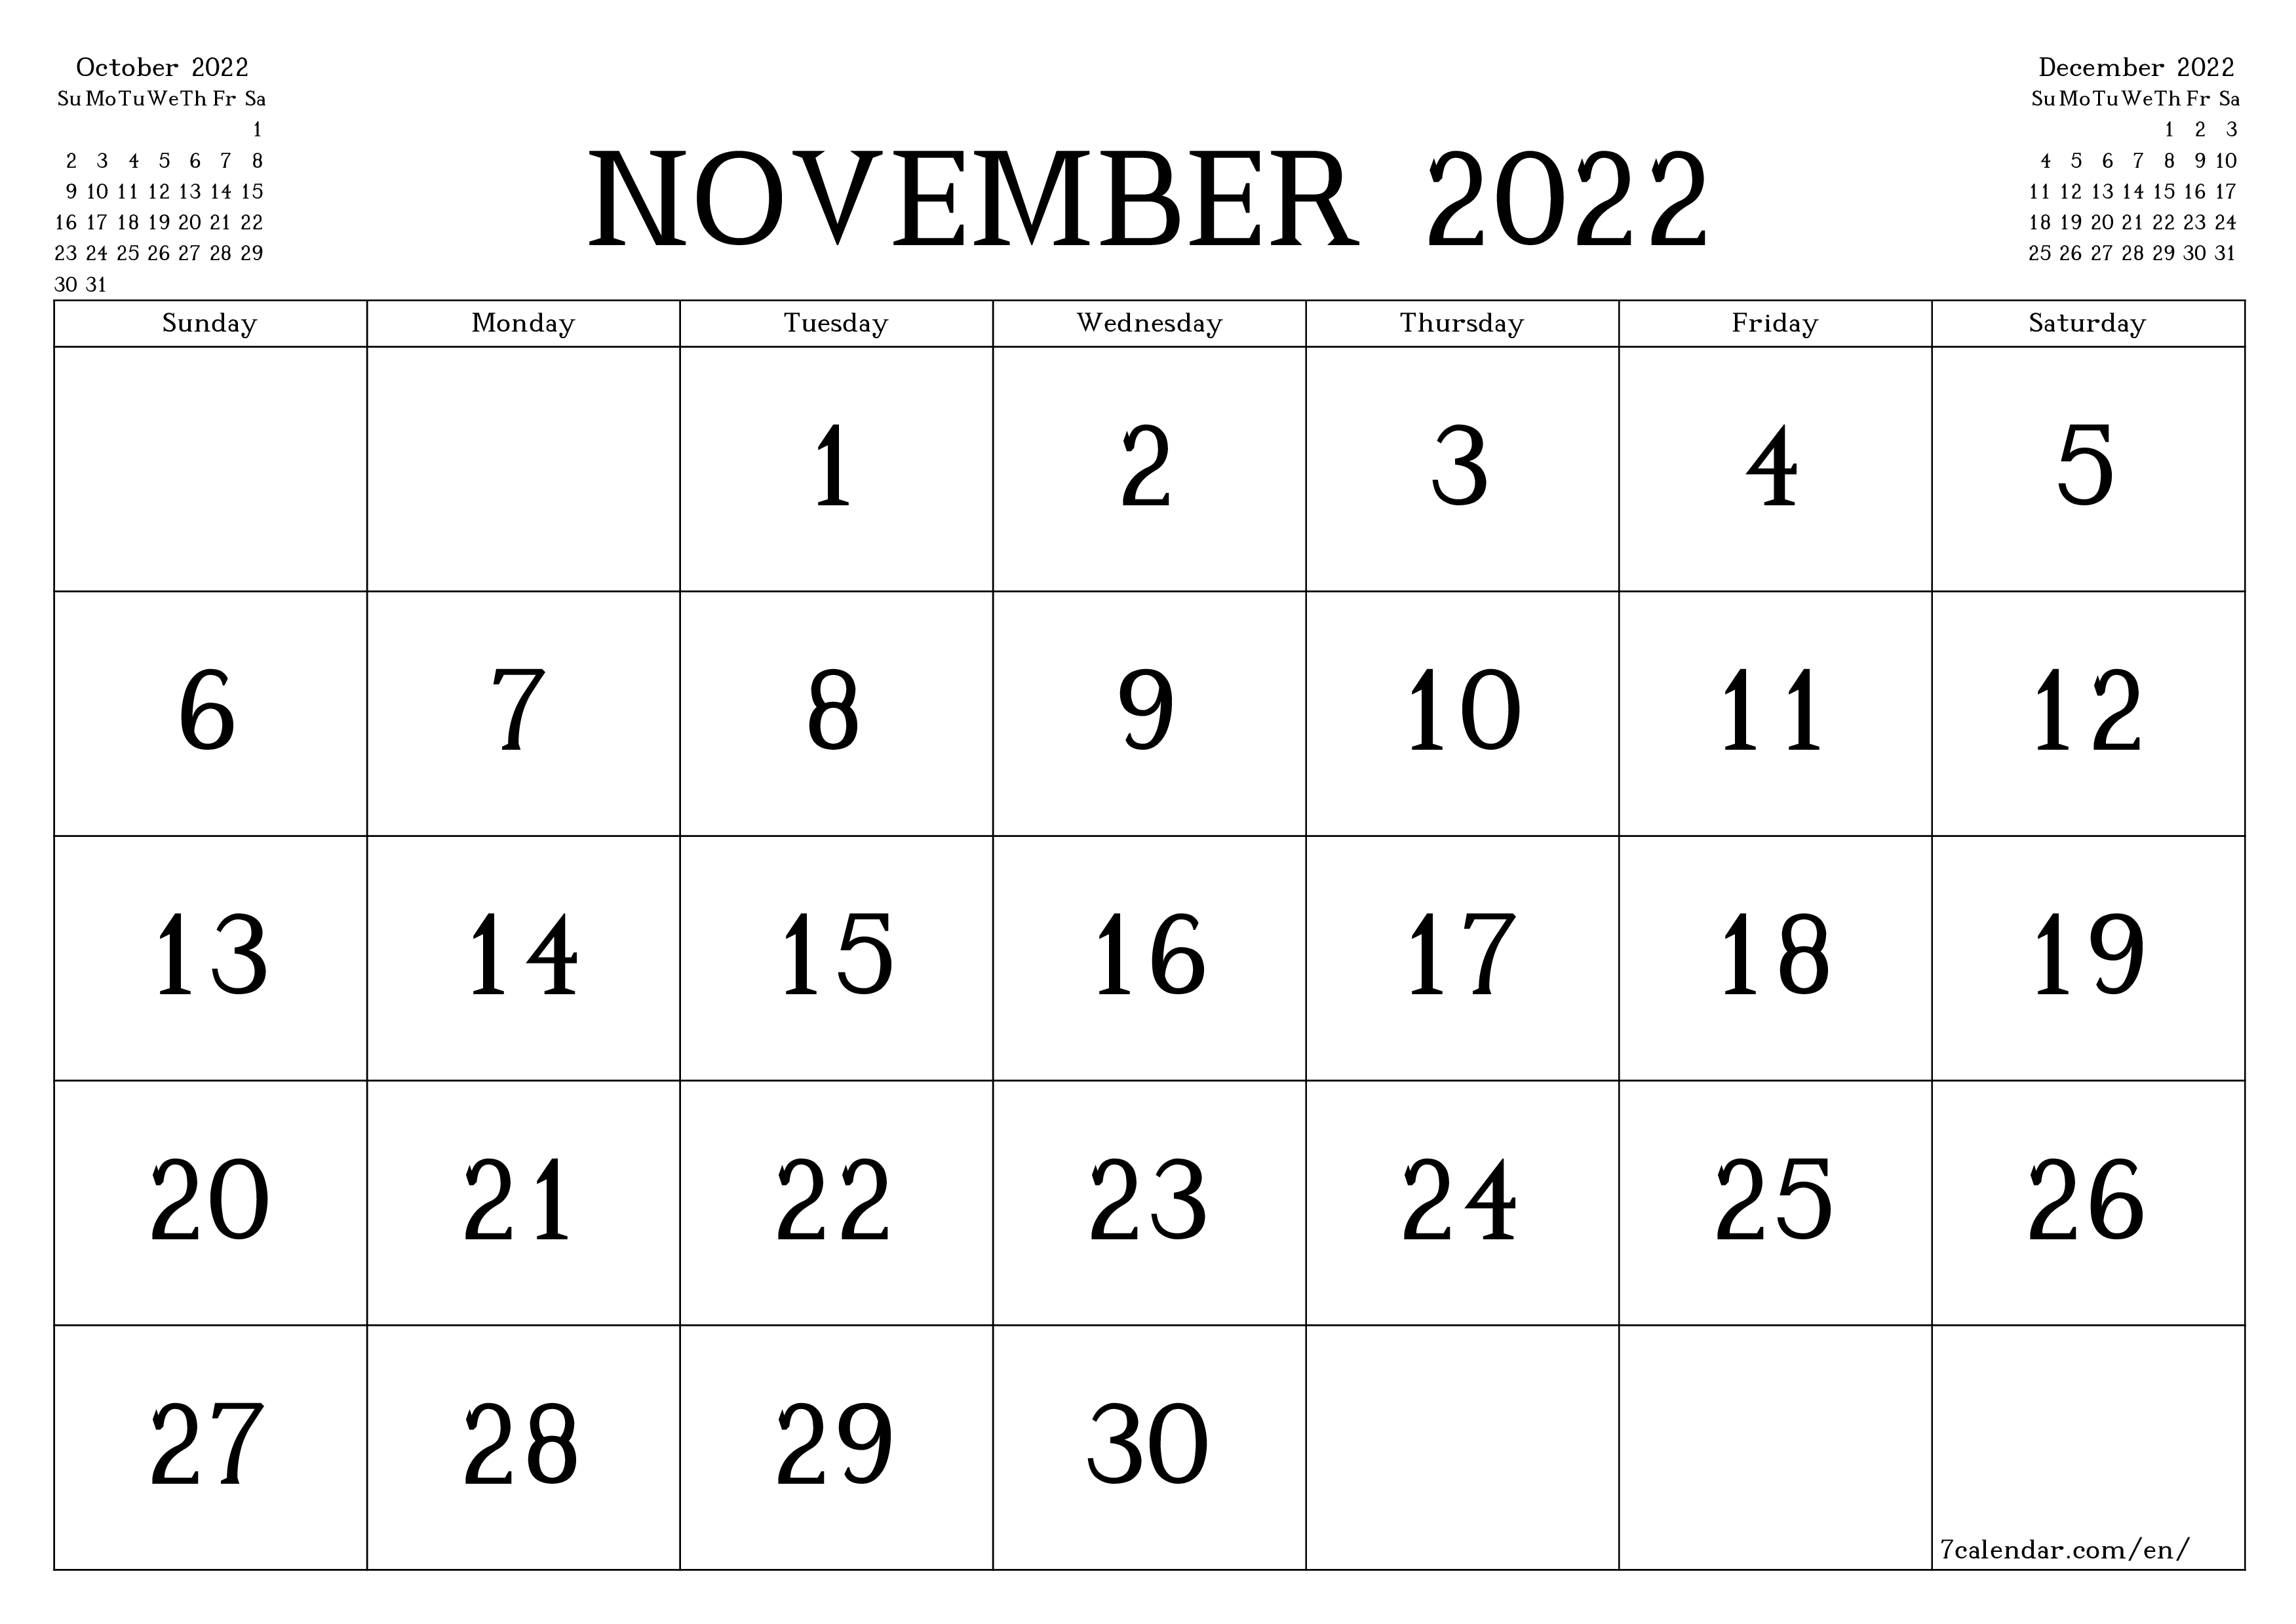 Monthly Calendar 2022 November November 2022 Printable Calendars And Planners, Pdf Templates For  Goodnotes, Notability, Remarkable - 7Calendar